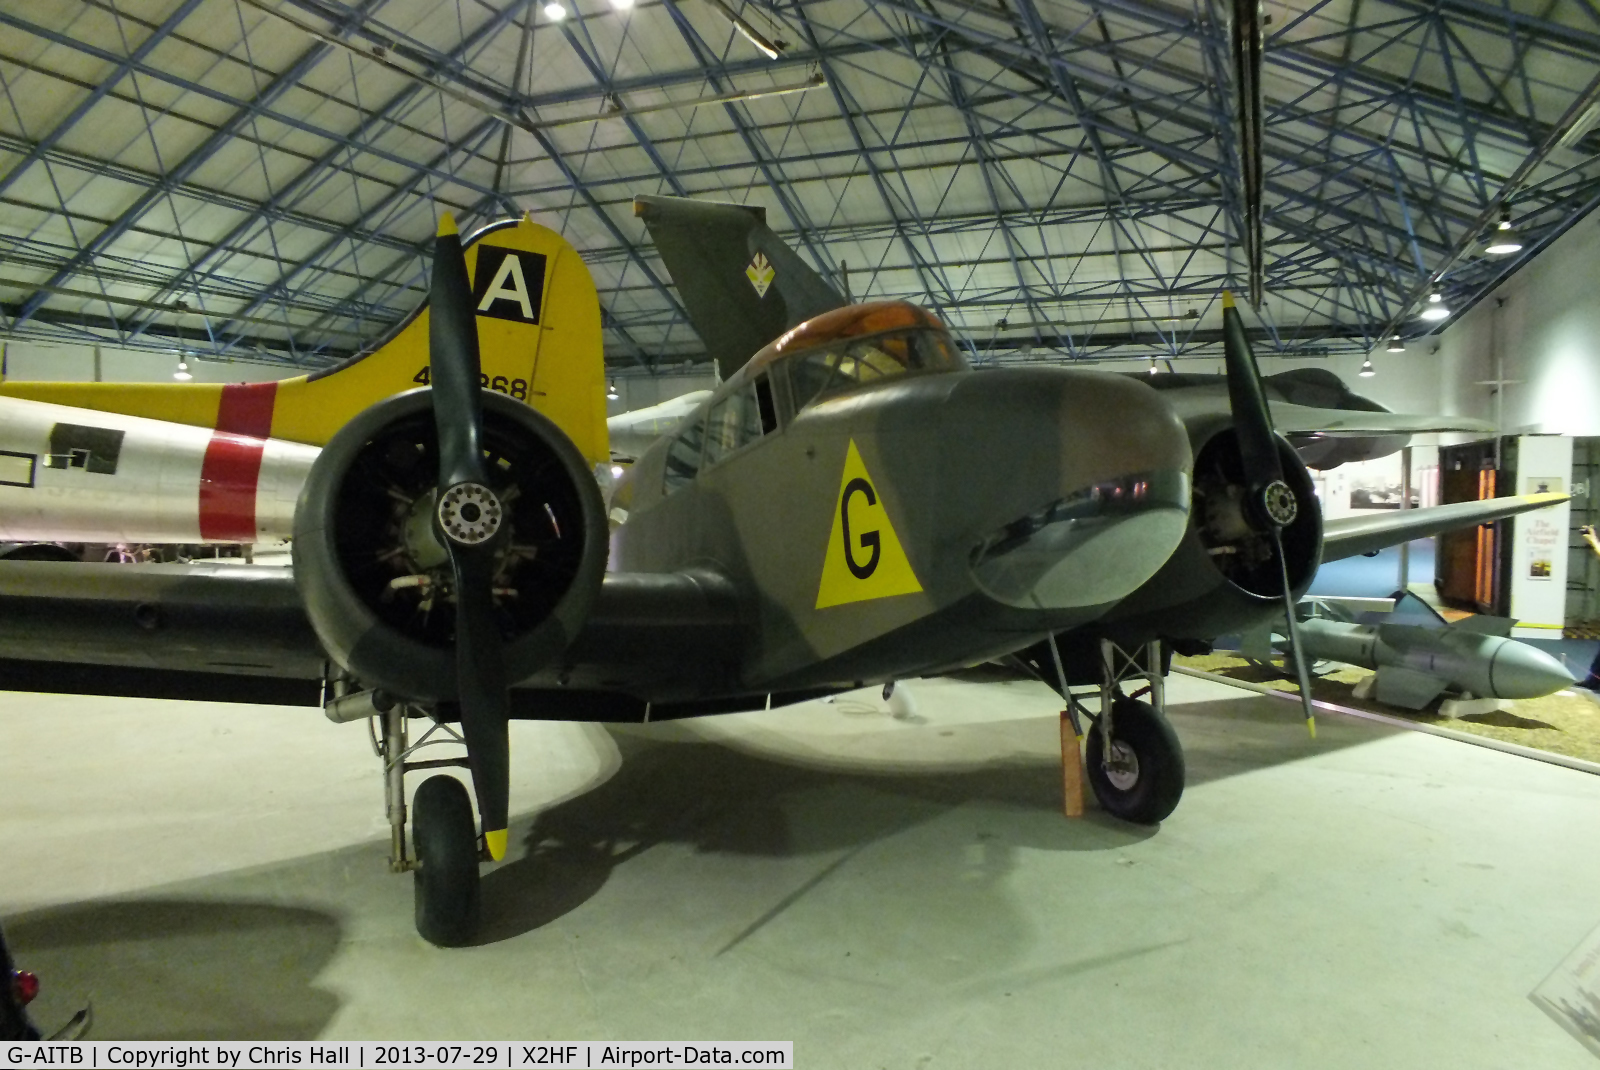 G-AITB, Airspeed AS.40 Oxford I C/N MP425, Displayed at the RAF Museum, Hendon